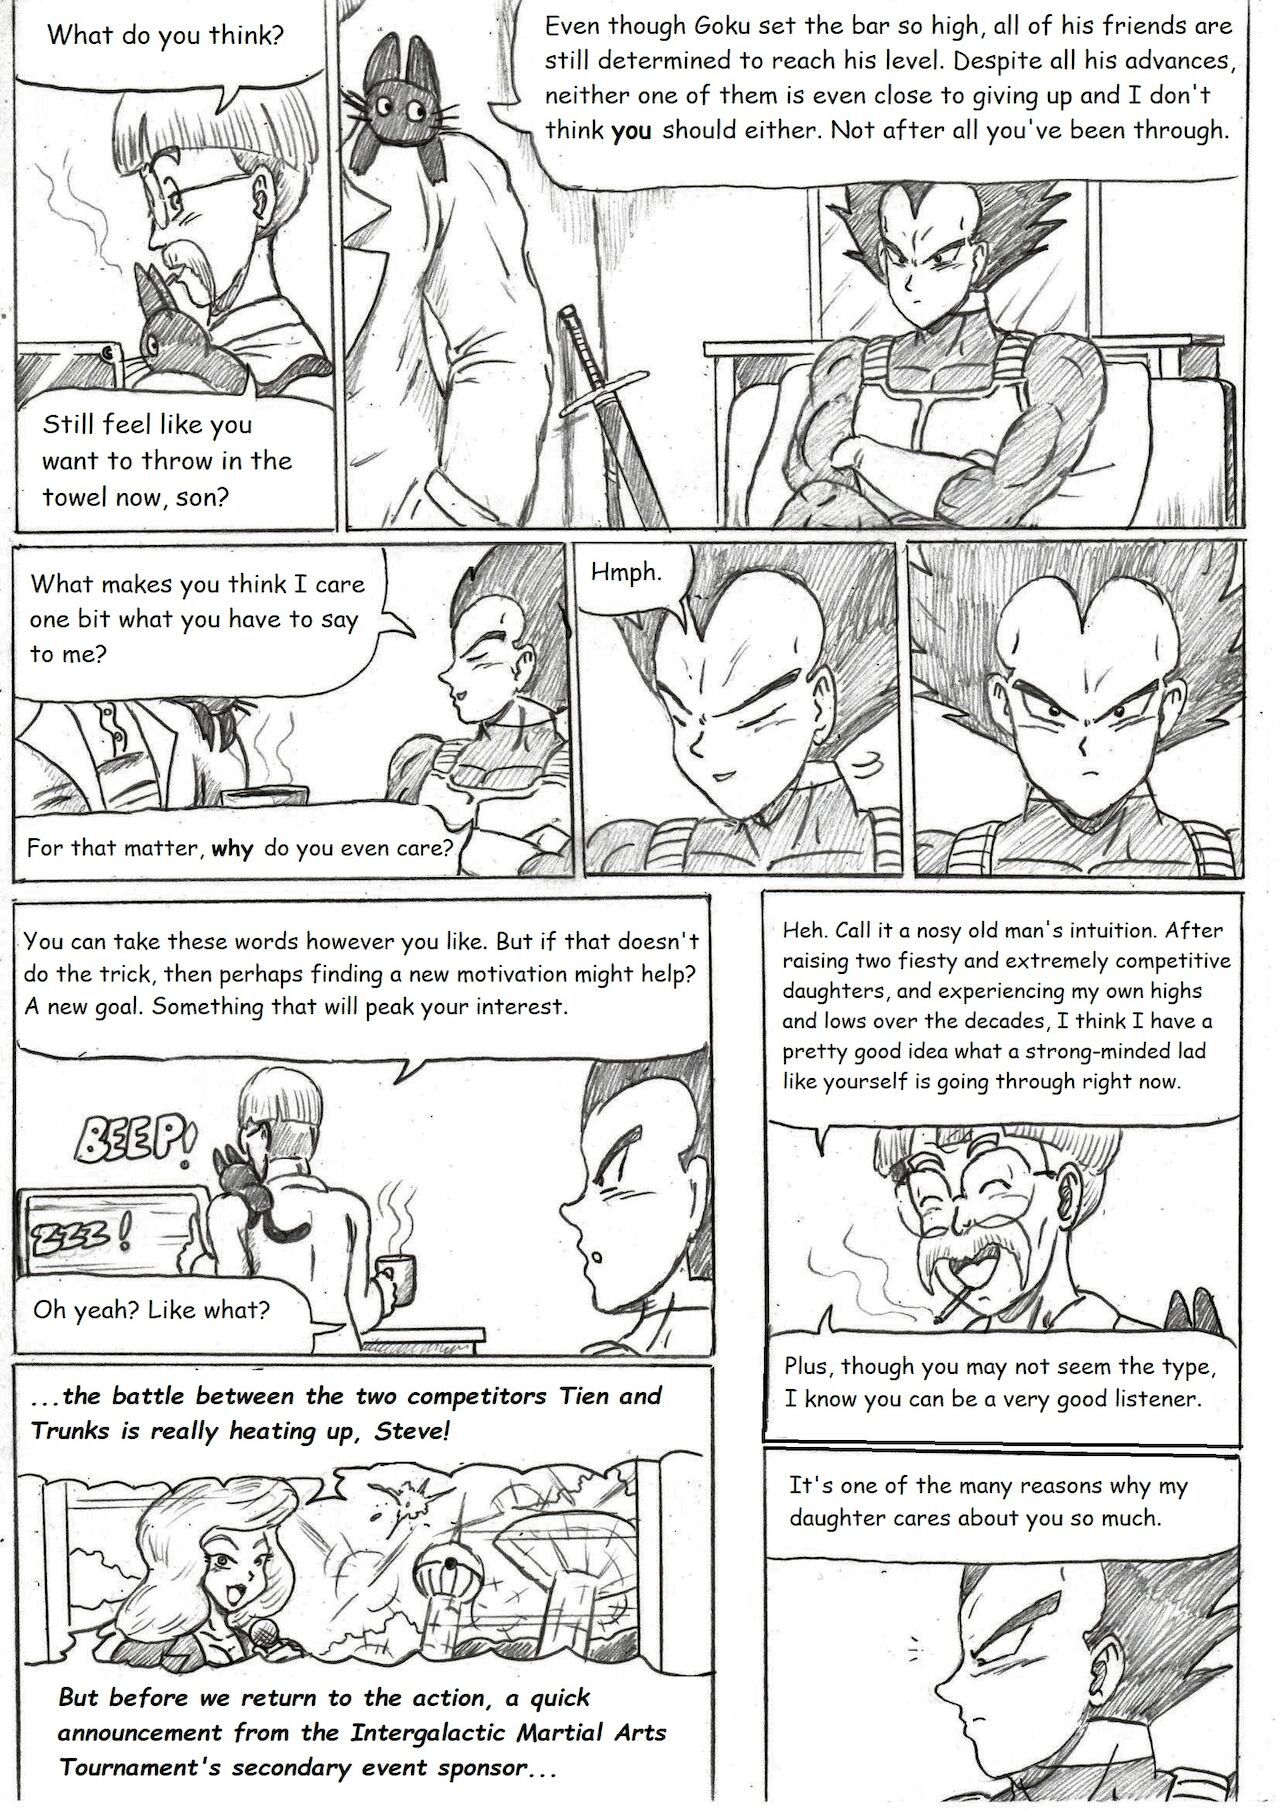 [TheWriteFiction] Dragonball Z Golden Age - Chapter 3 - The Strange Tournament (Ongoing) 60